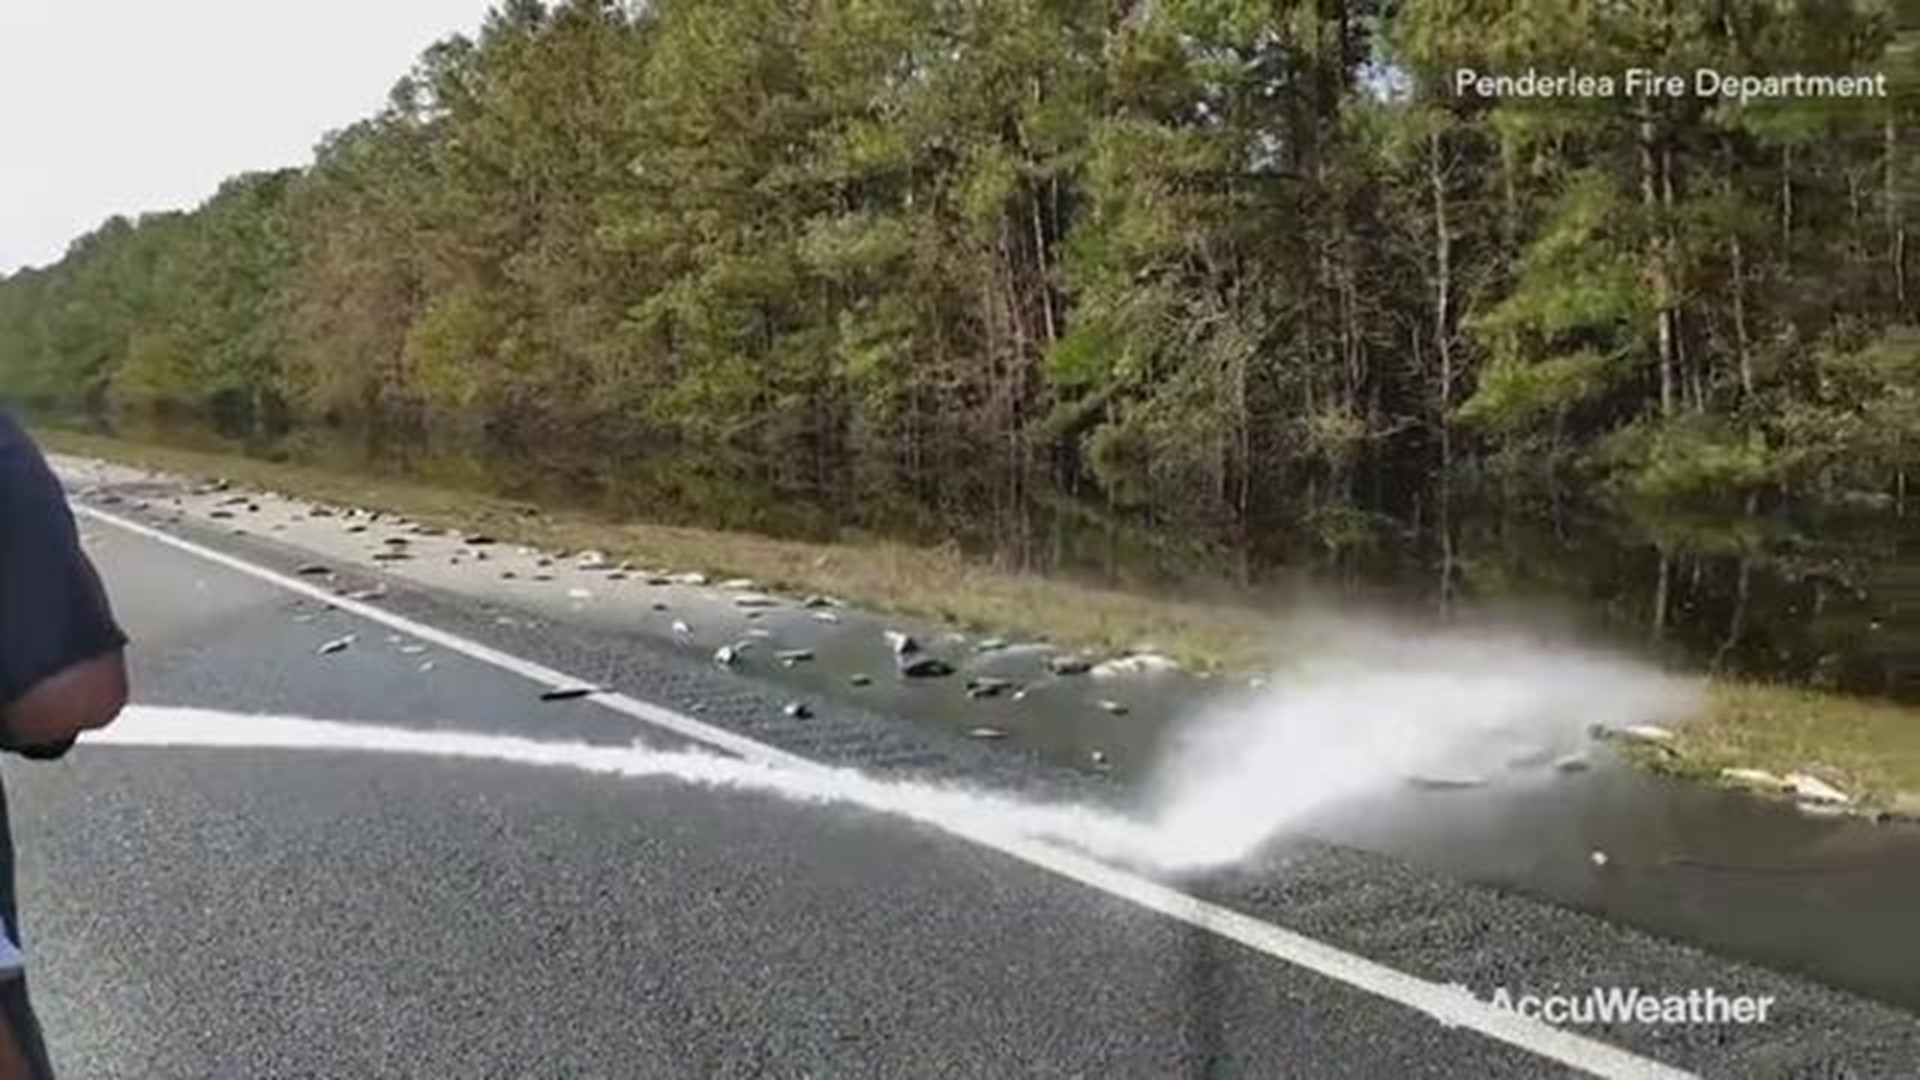 Firefighters along Interstate-40 near Wallace, North Carolina were forced to use hoses to clear out dead fish that were left behind from Hurricane Florence's floodwaters.  The floodwaters were so high that the fish were able to travel far from their natur